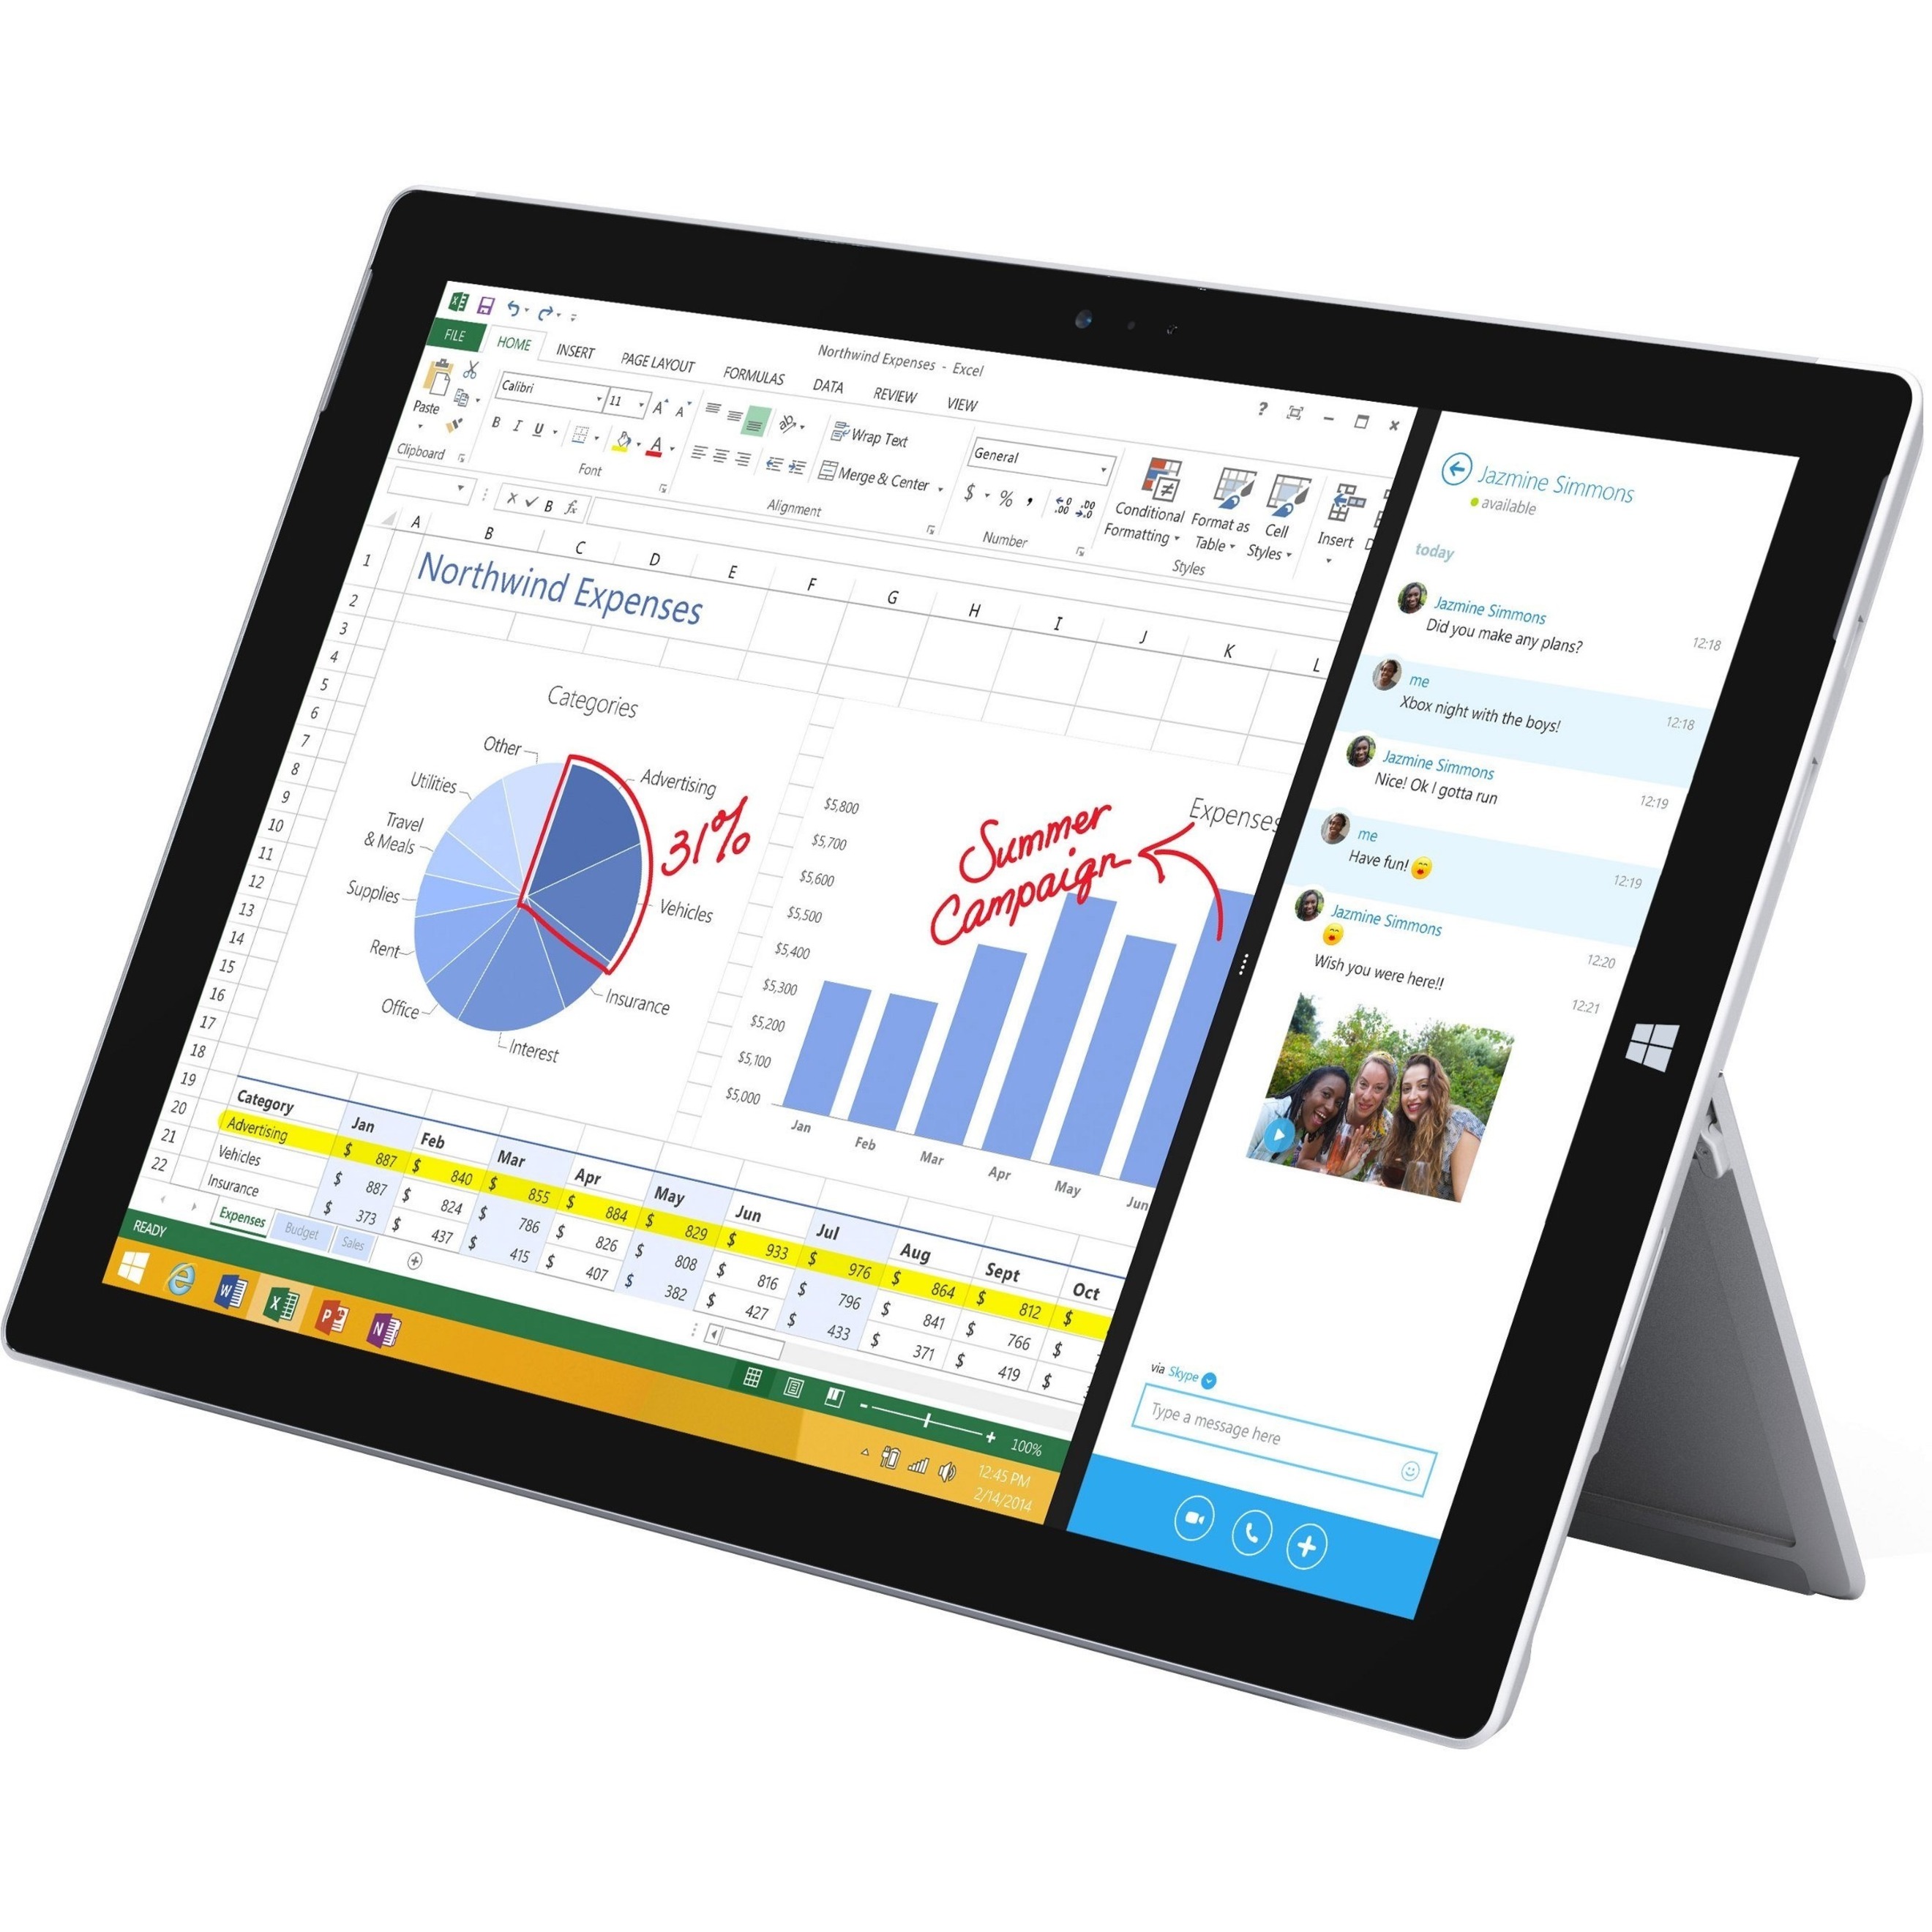 Microsoft- IMSourcing Surface Pro 3 Tablet, 12", 4 GB, 64 GB SSD, Windows 8.1 Pro, Silver - image 1 of 11